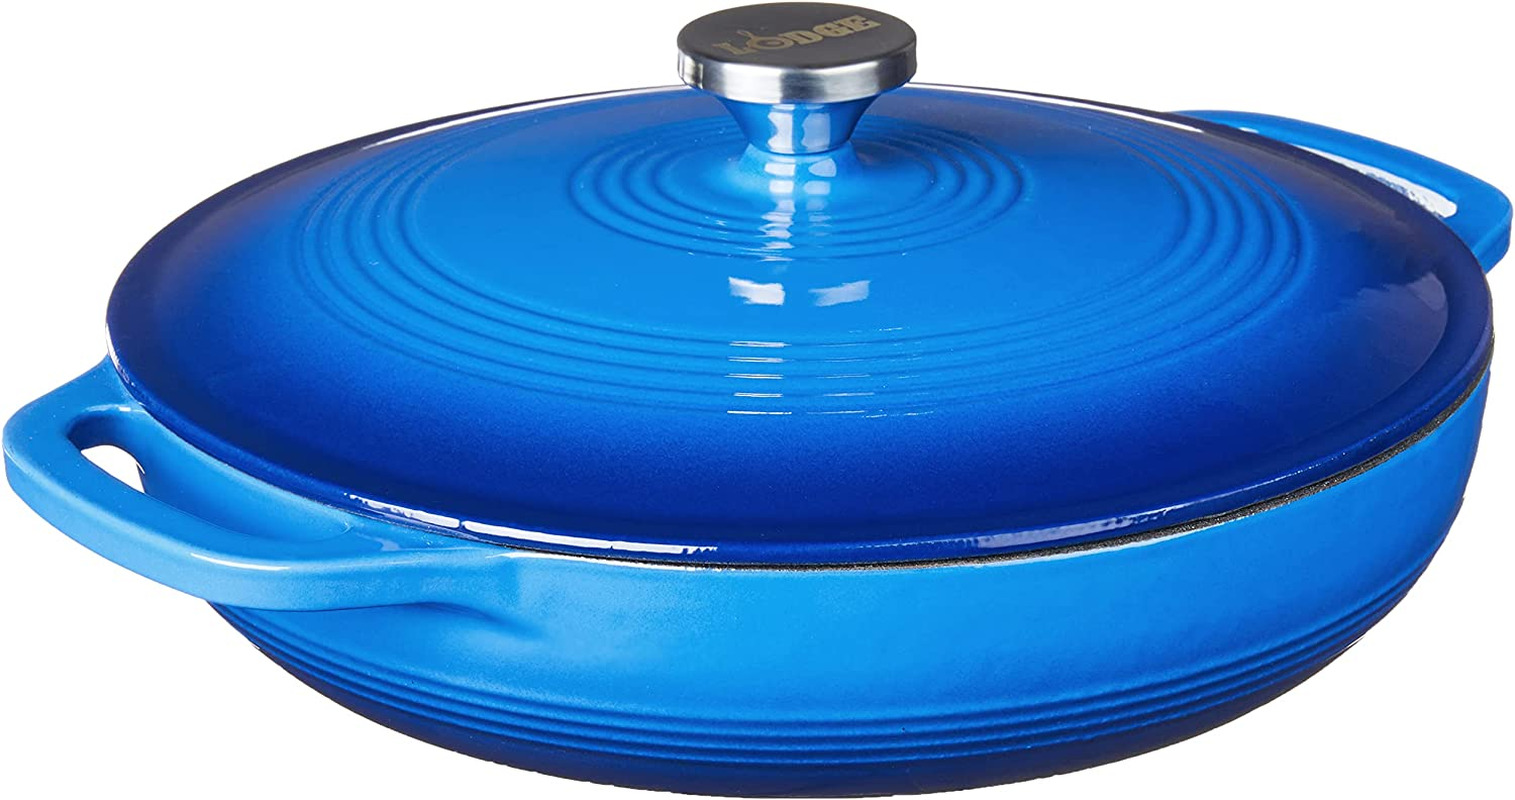 Casserole with Lid Oval 3.6 Quart Enameled Cast Iron Oven Stovetop Safe - Blue